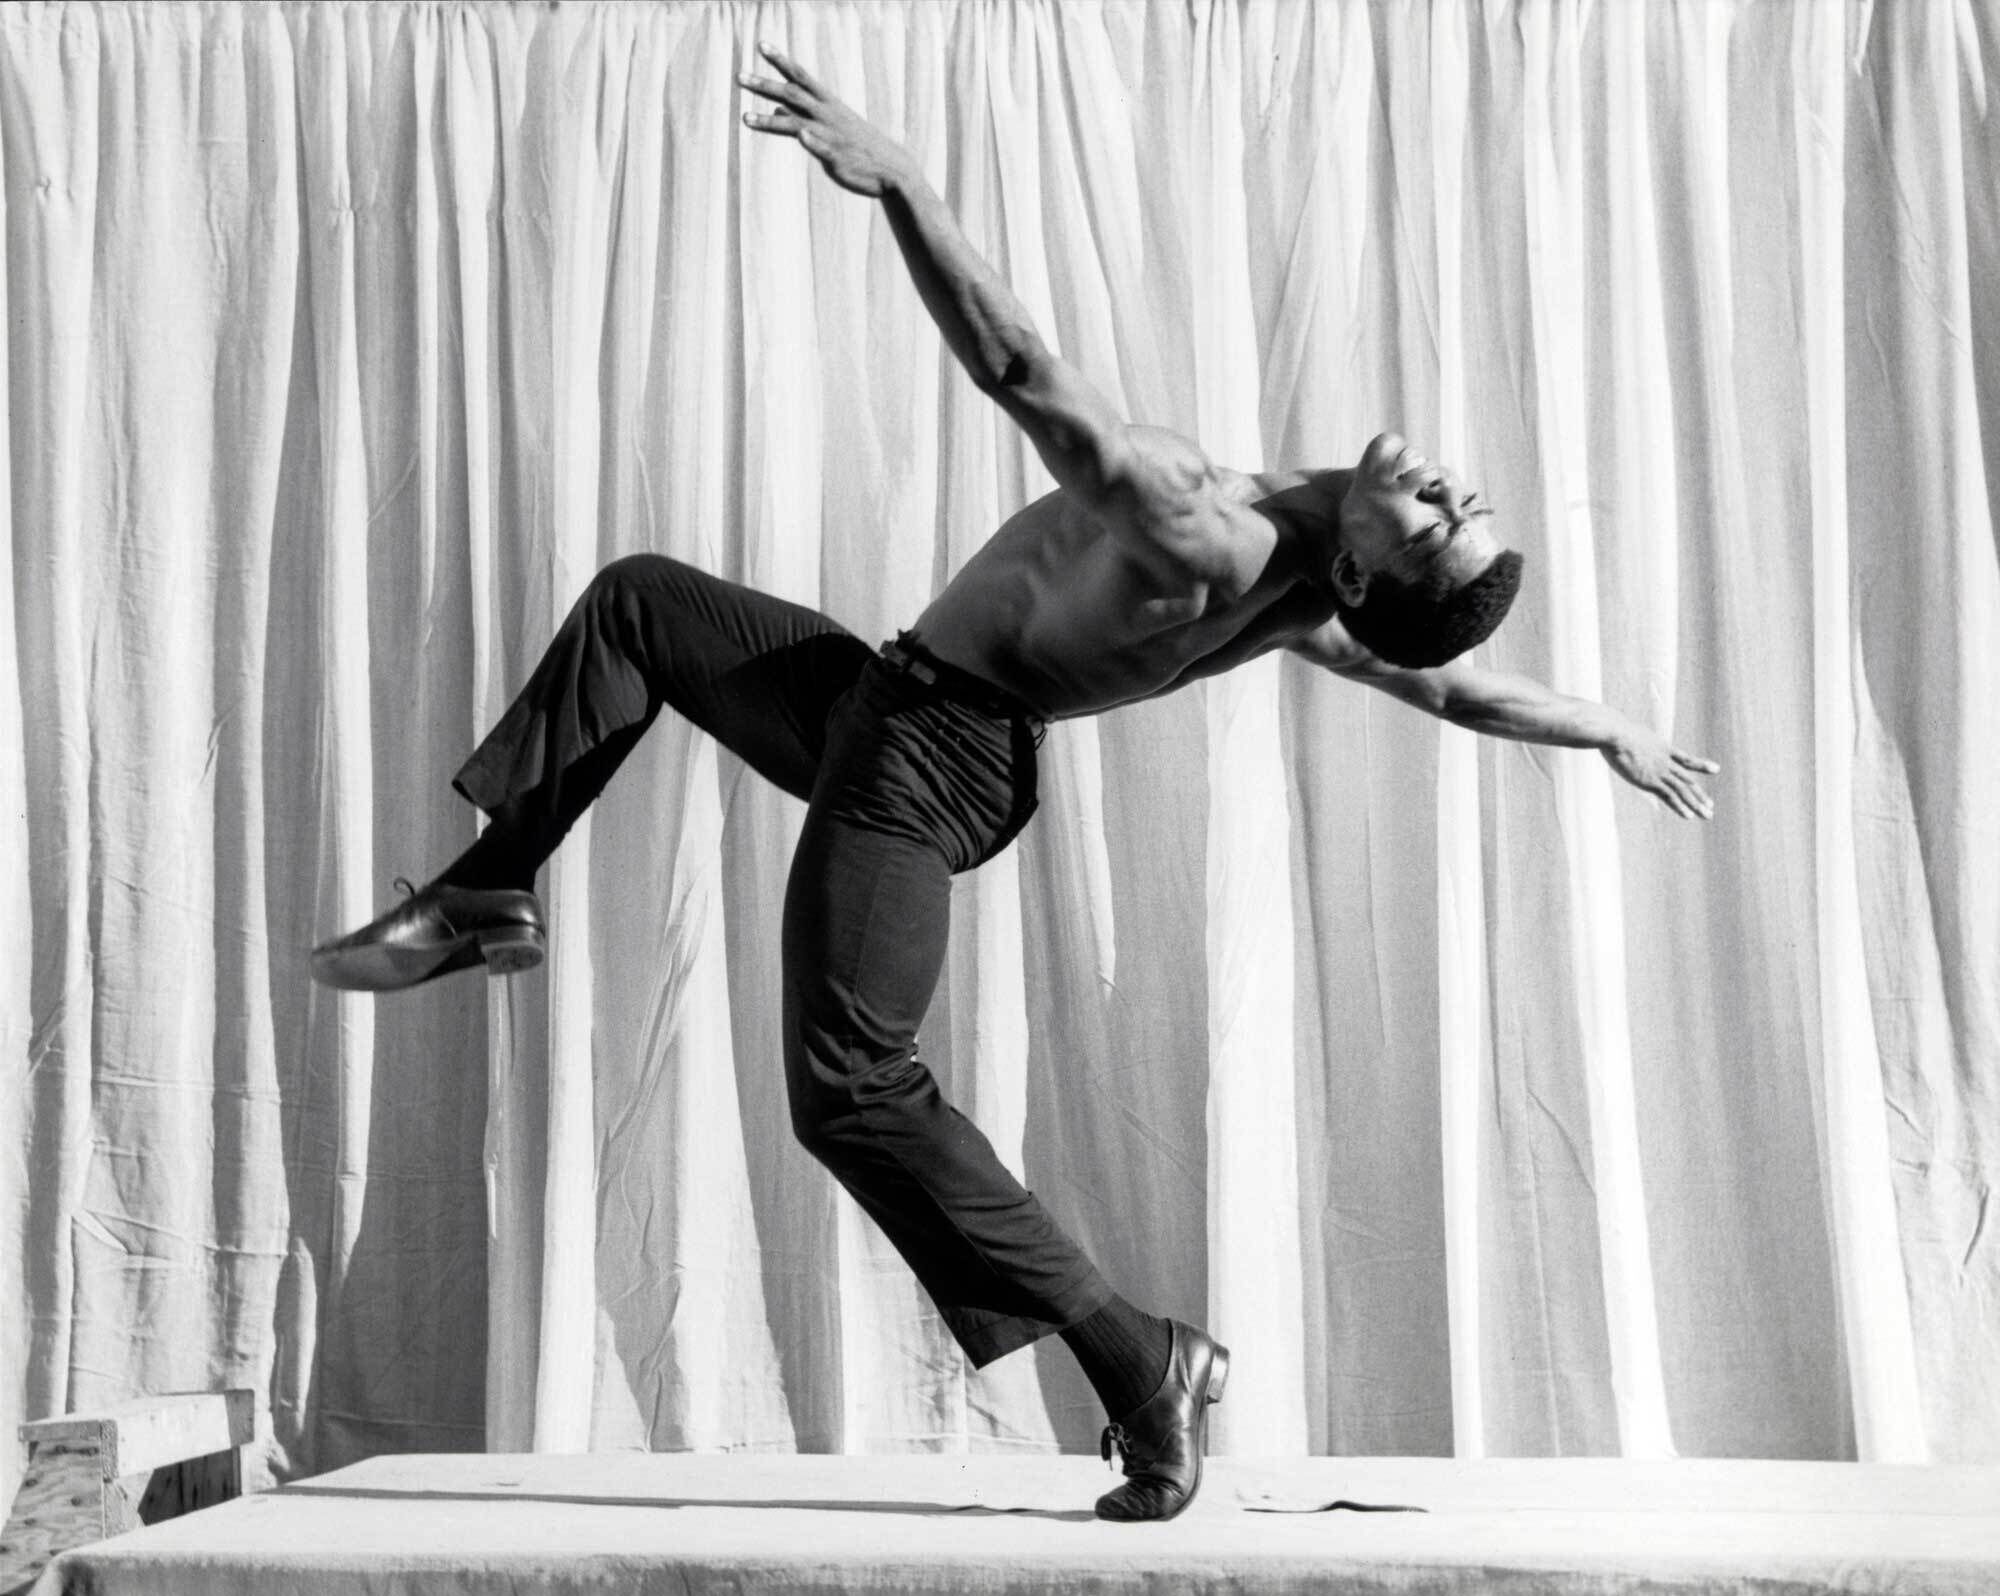 A shirtless man, Alvin Ailey, in black pants and shoes performs a dynamic dance pose against a backdrop of white curtains.